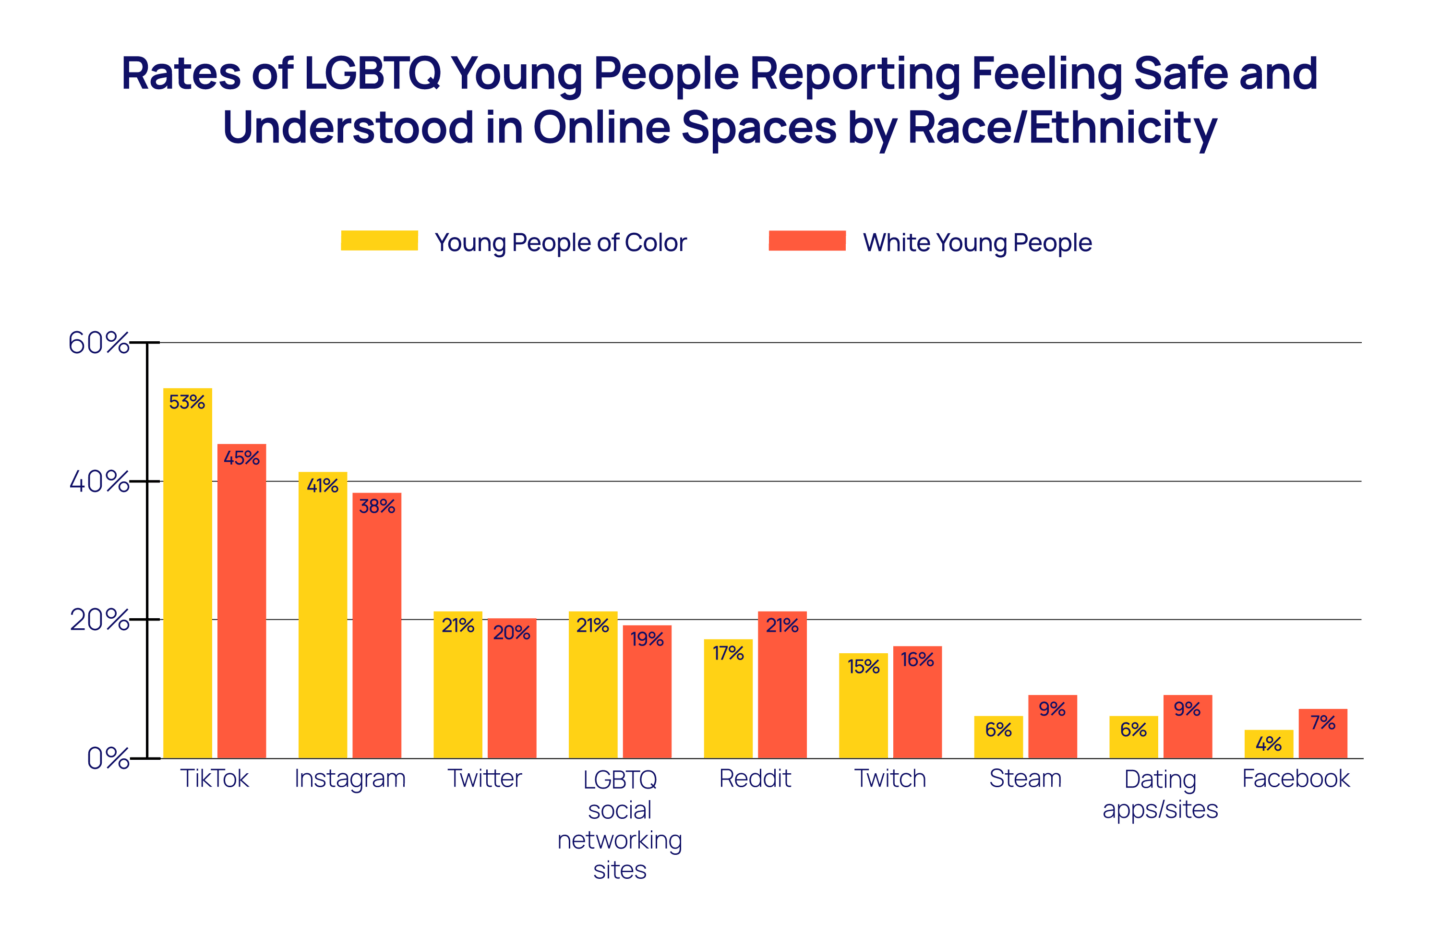 Rates of LGBTQ Young People Reporting Feeling Safe and Understood in Online Spaces by Race/Ethnicity bar chart